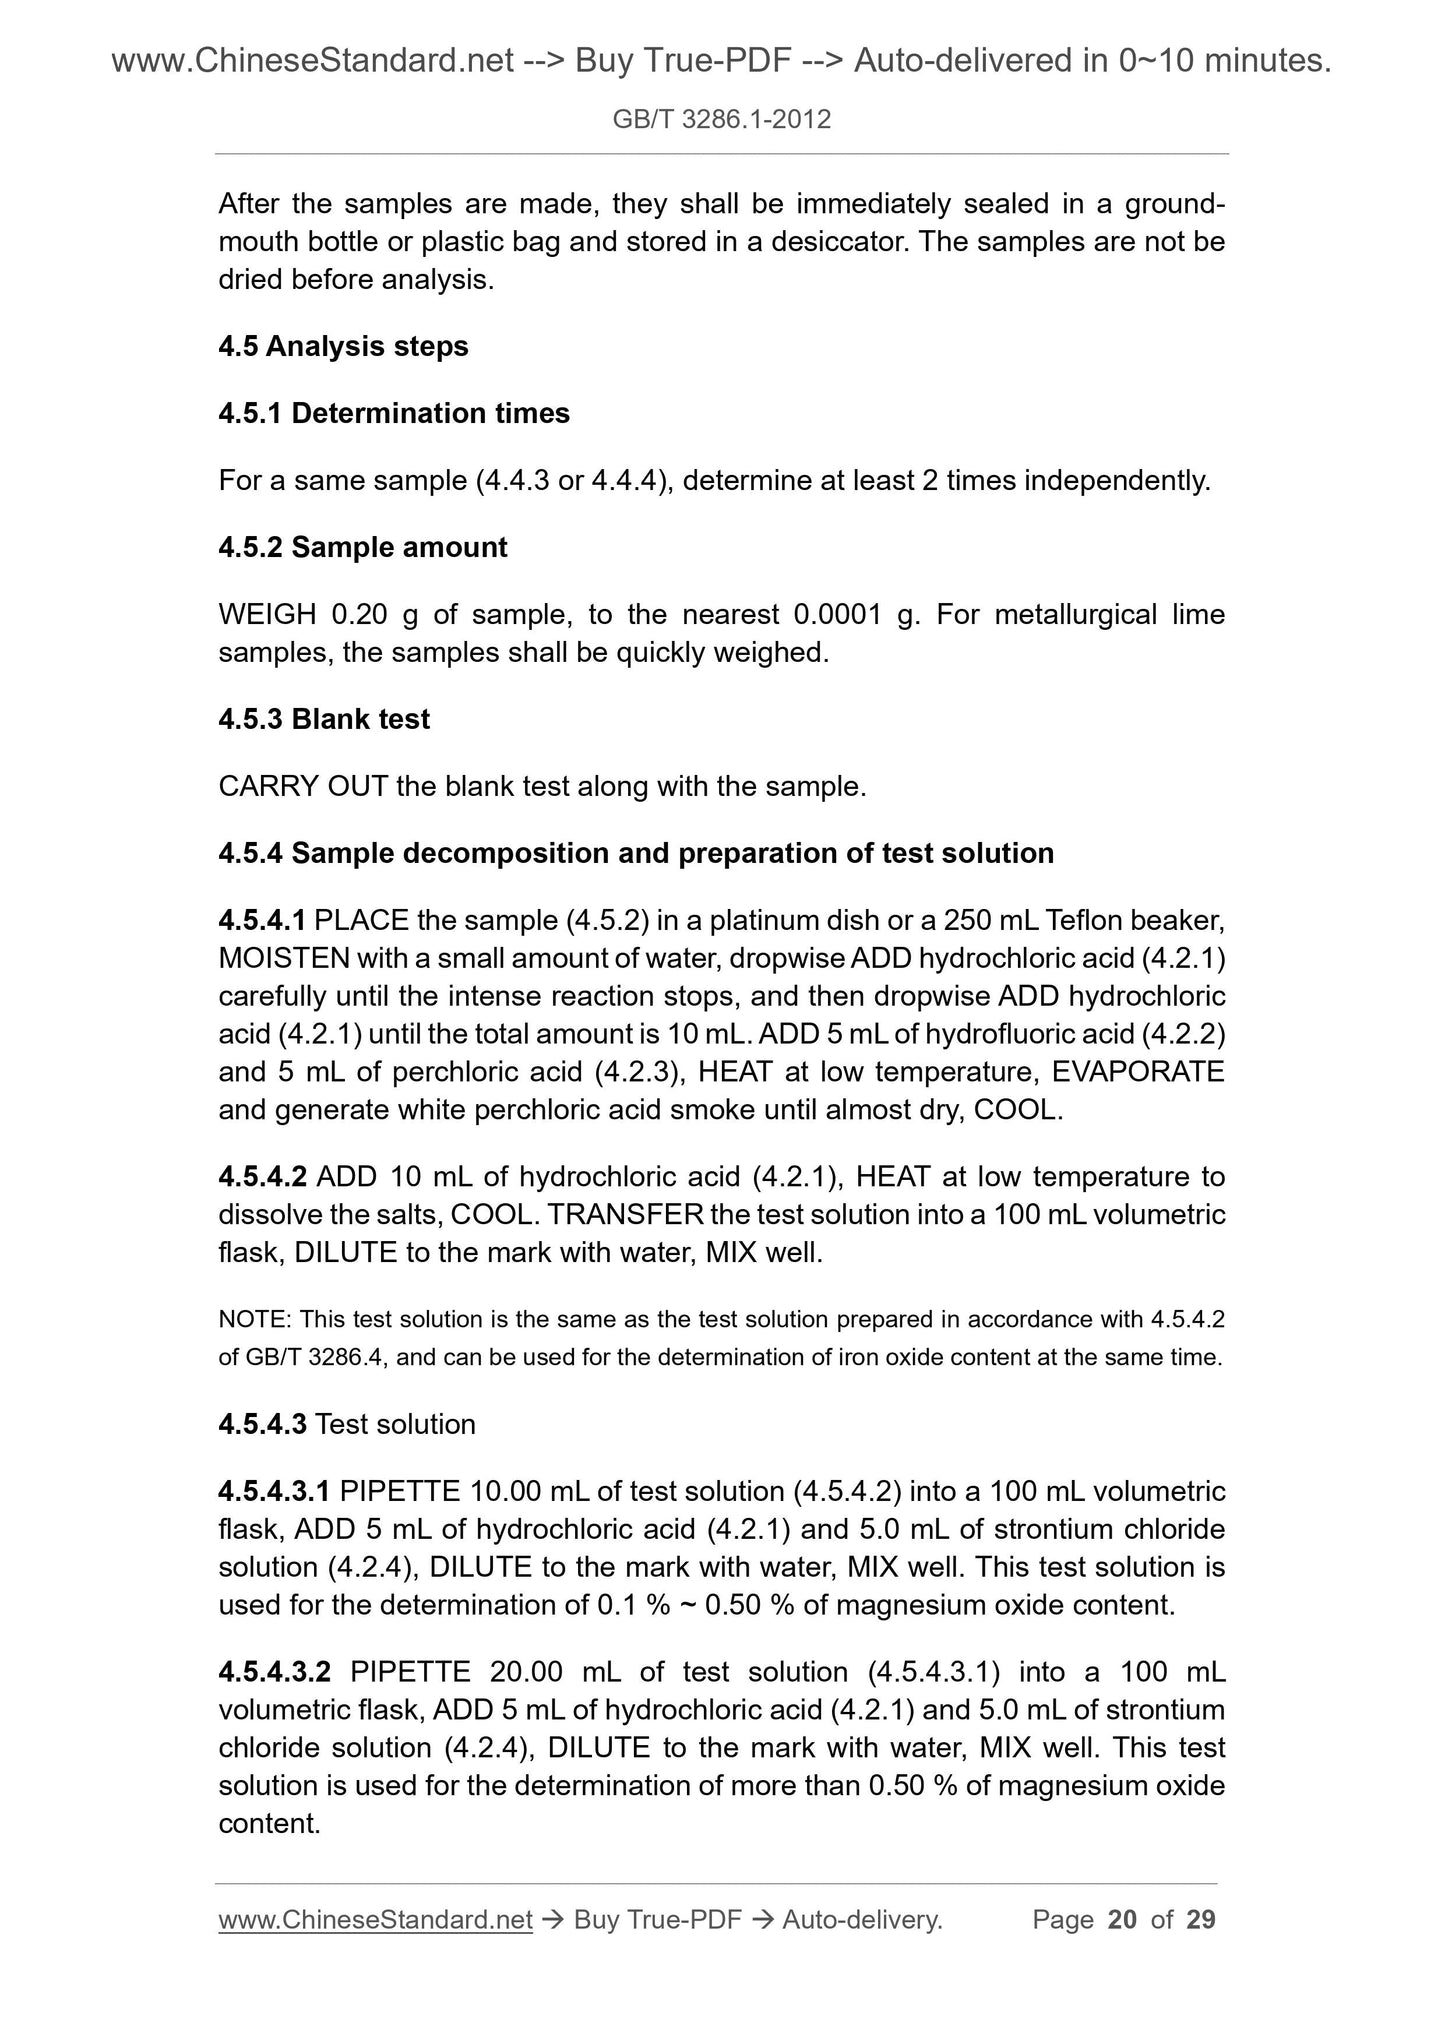 GB/T 3286.1-2012 Page 10